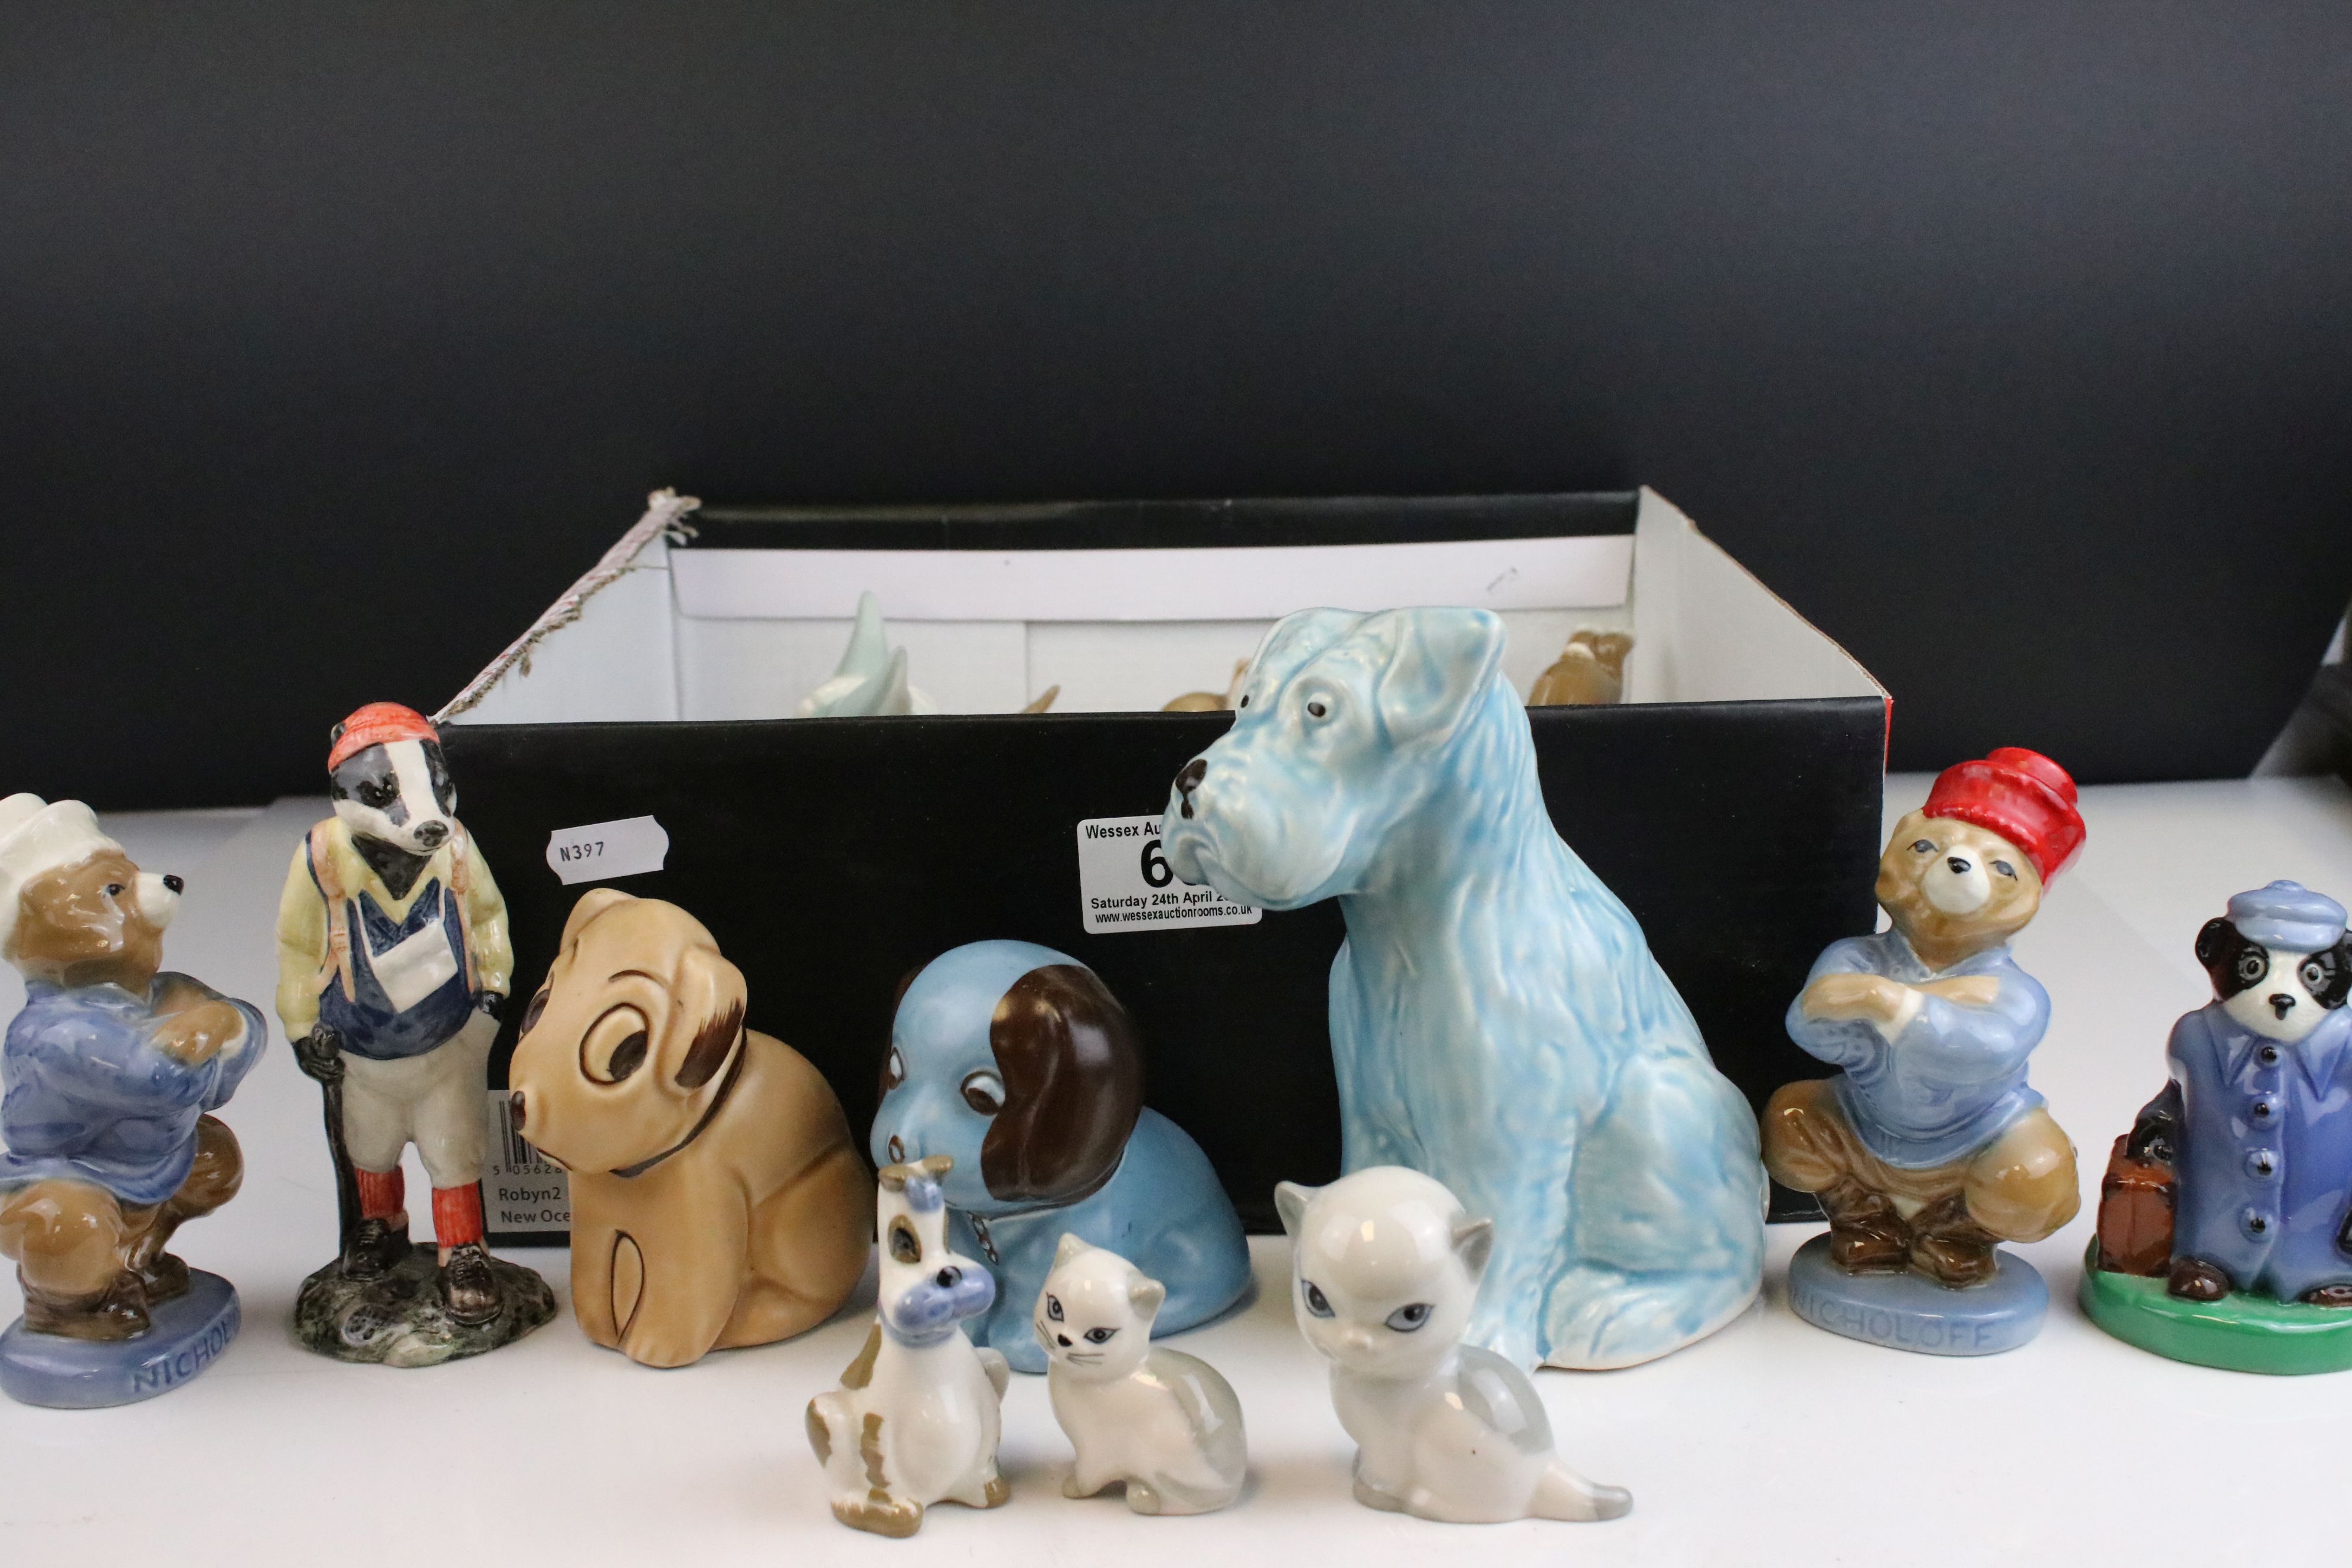 Collection of Ceramic Animals including Szeiler, Beswick, Wade, Sylvac style (approx. 29 in total)